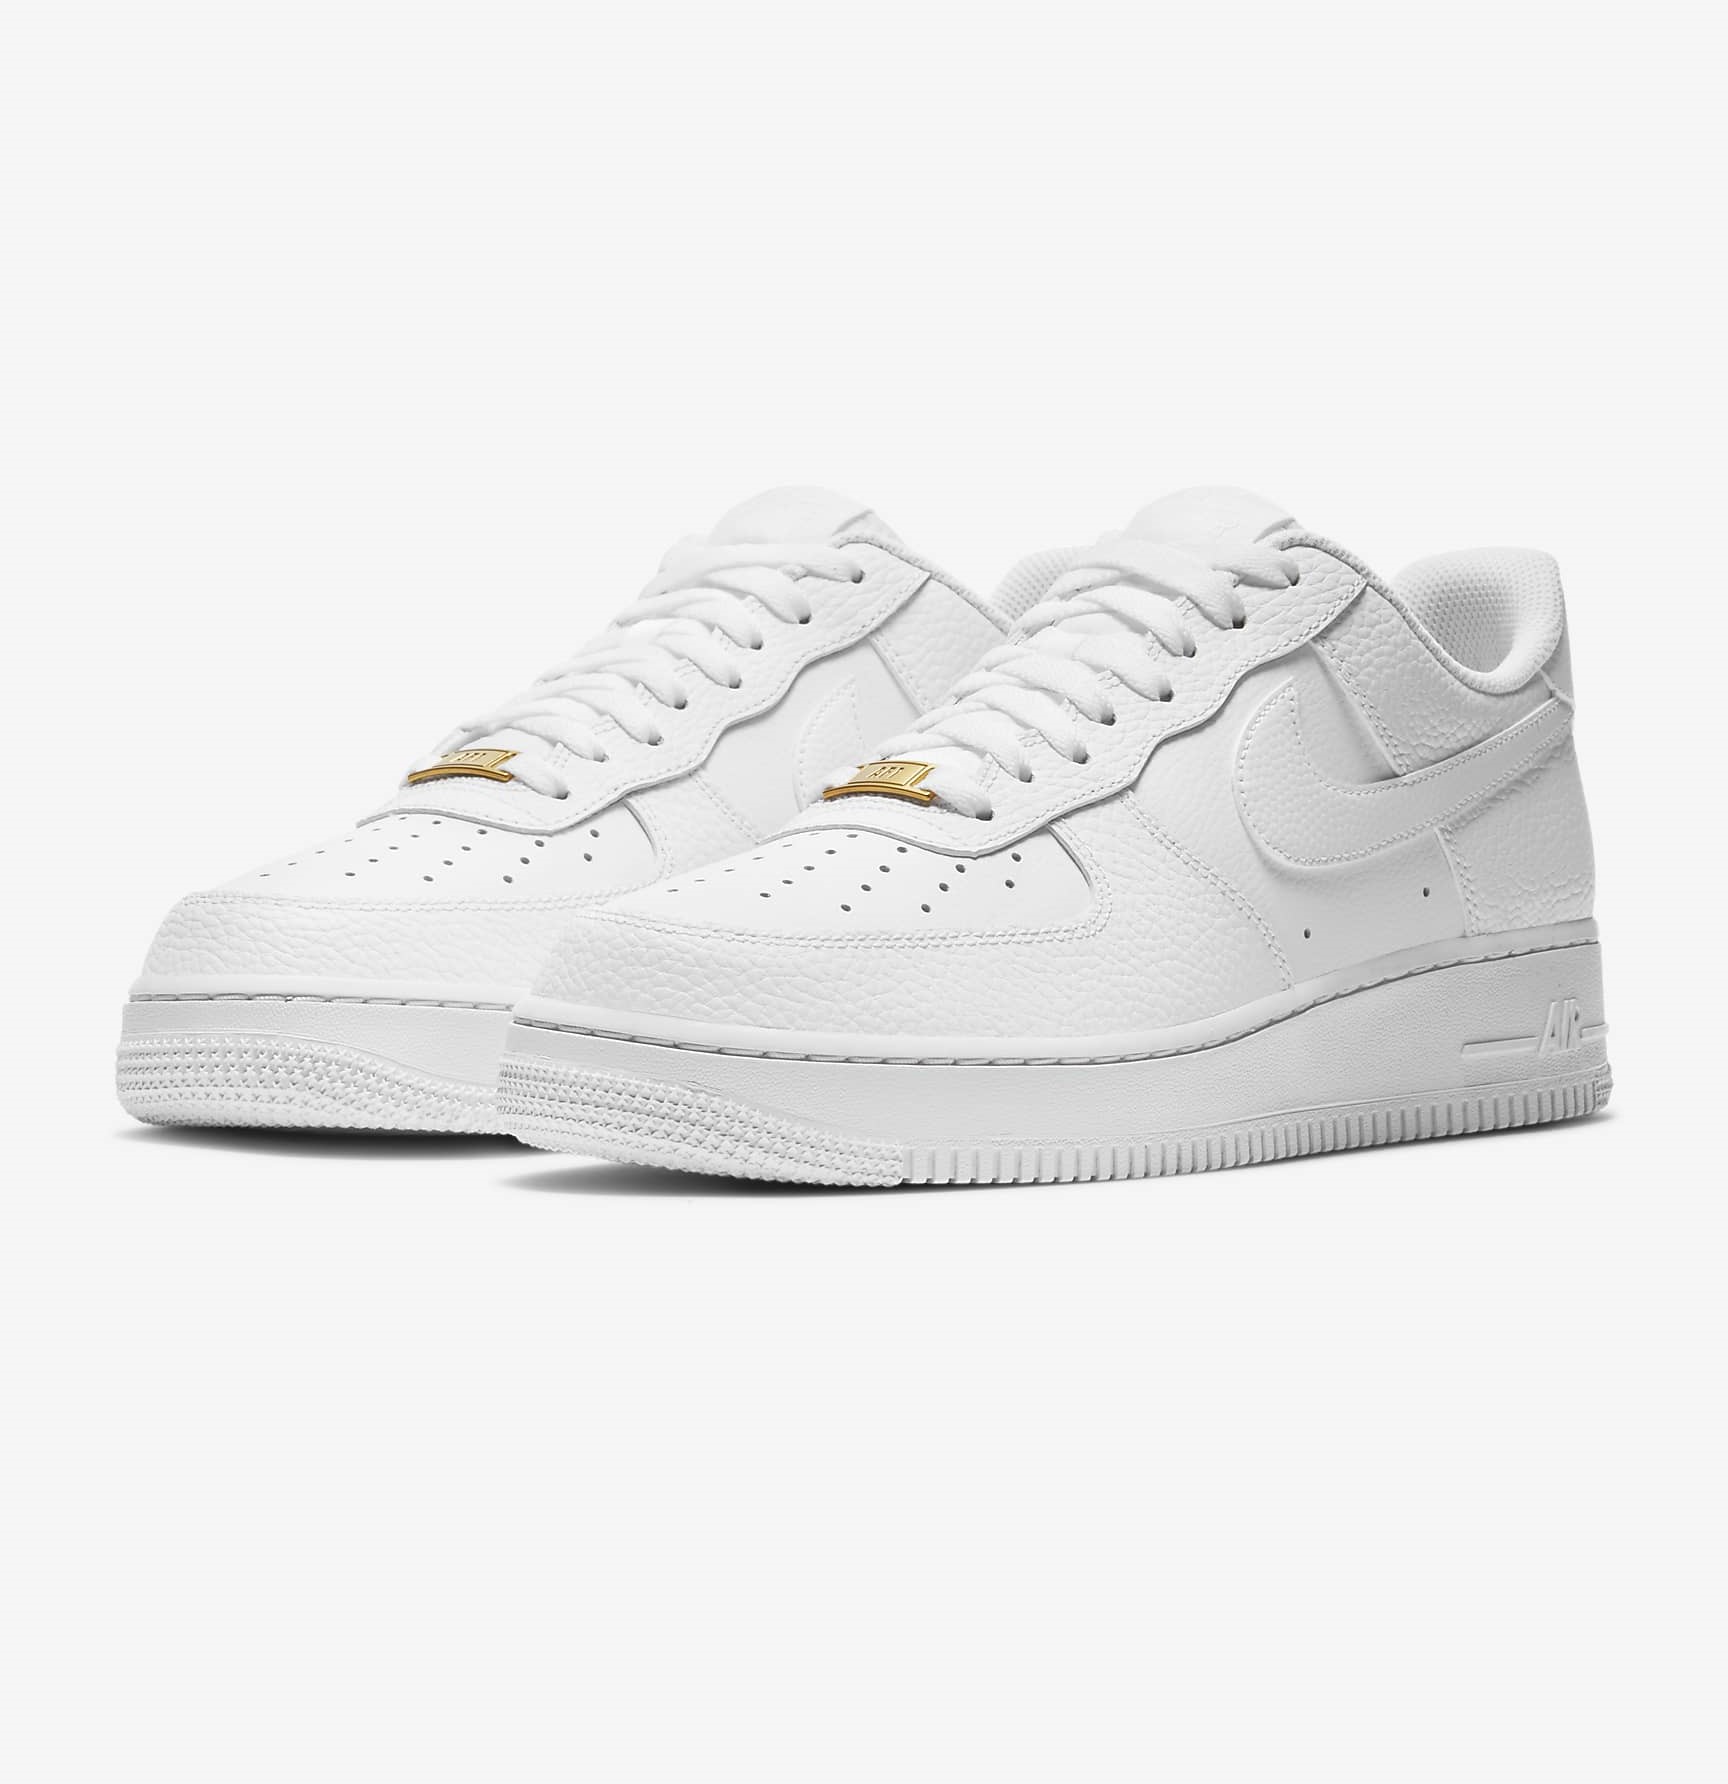 Nike af1 all white Gives All-White Air Force 1 Low An Elegant Upgrade - Maxim